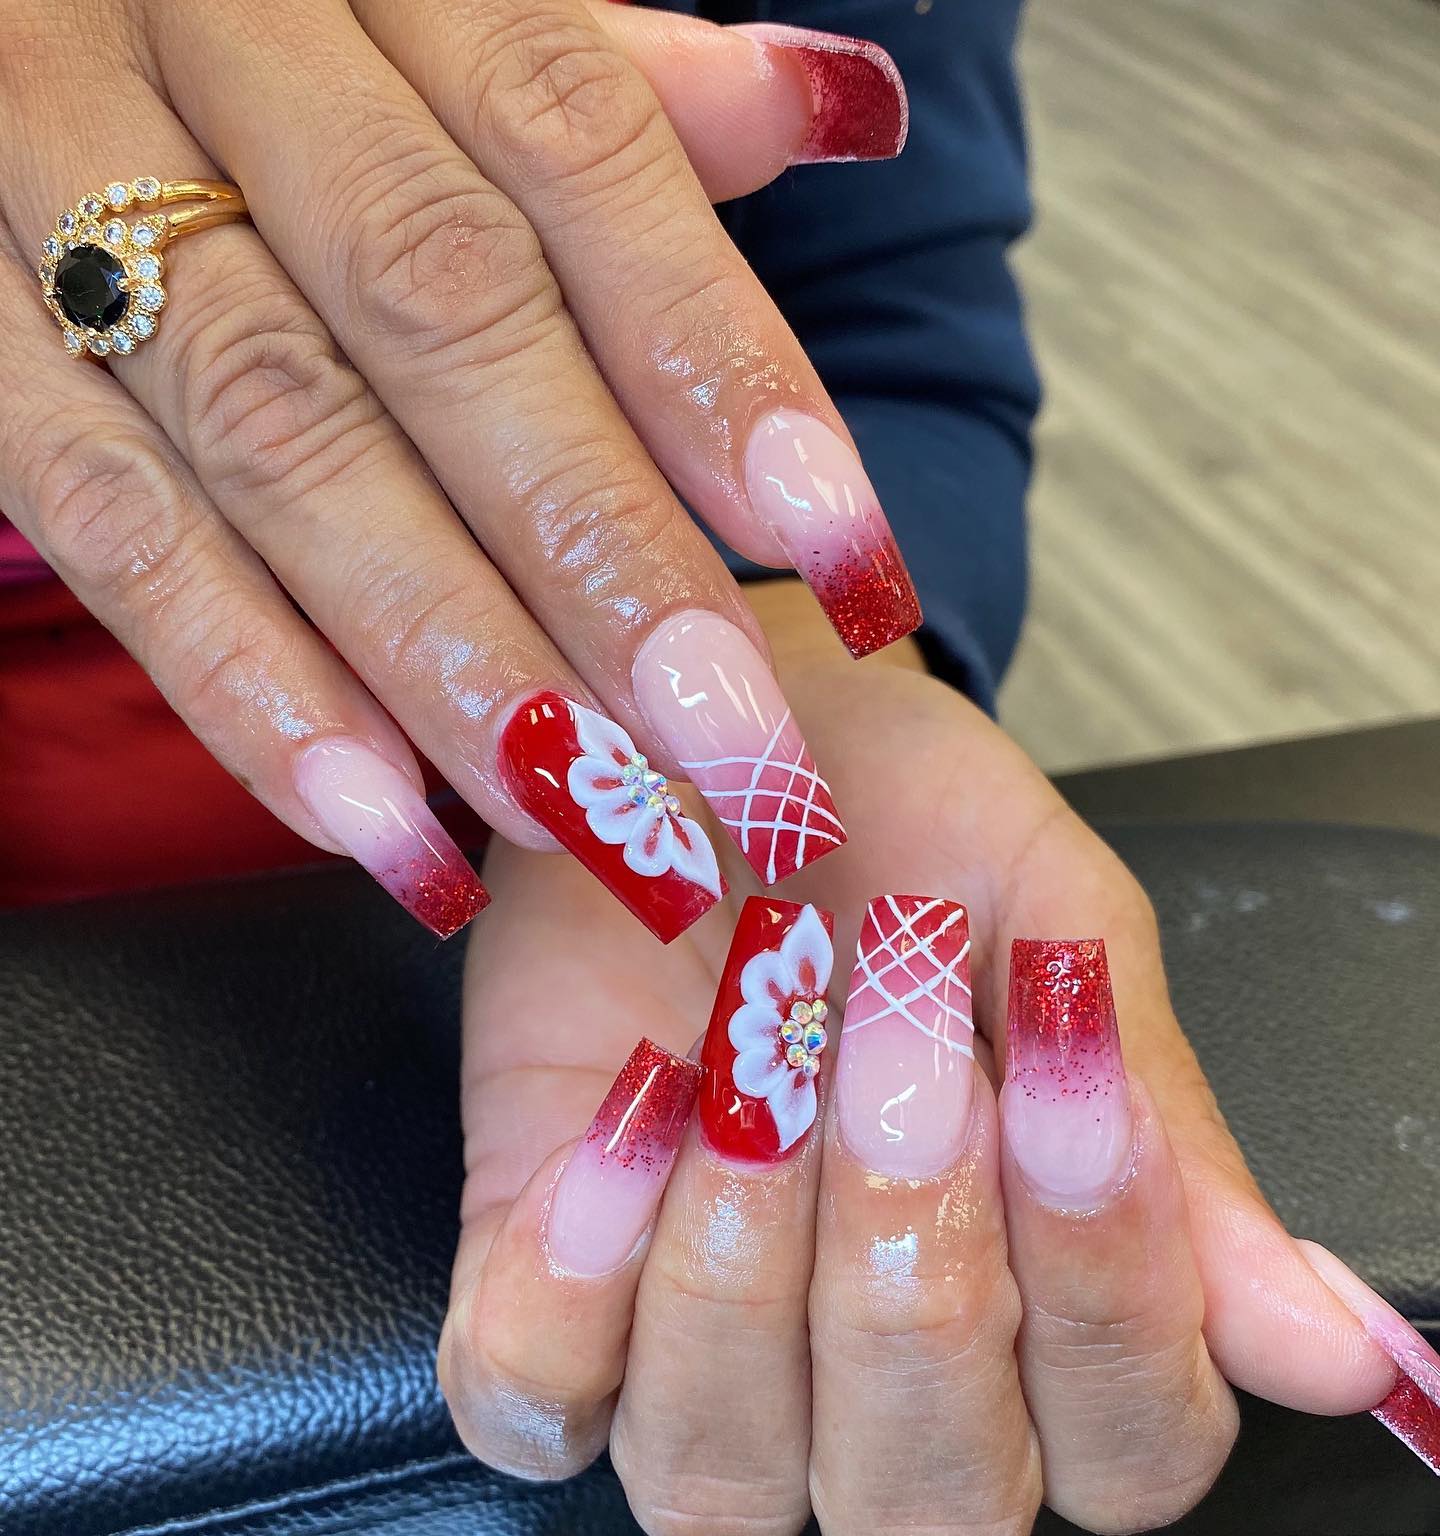 Nails designs in 2022 | Work nails, Short acrylic nails, Long square acrylic  nails | Long square acrylic nails, Square acrylic nails, Luxury nails